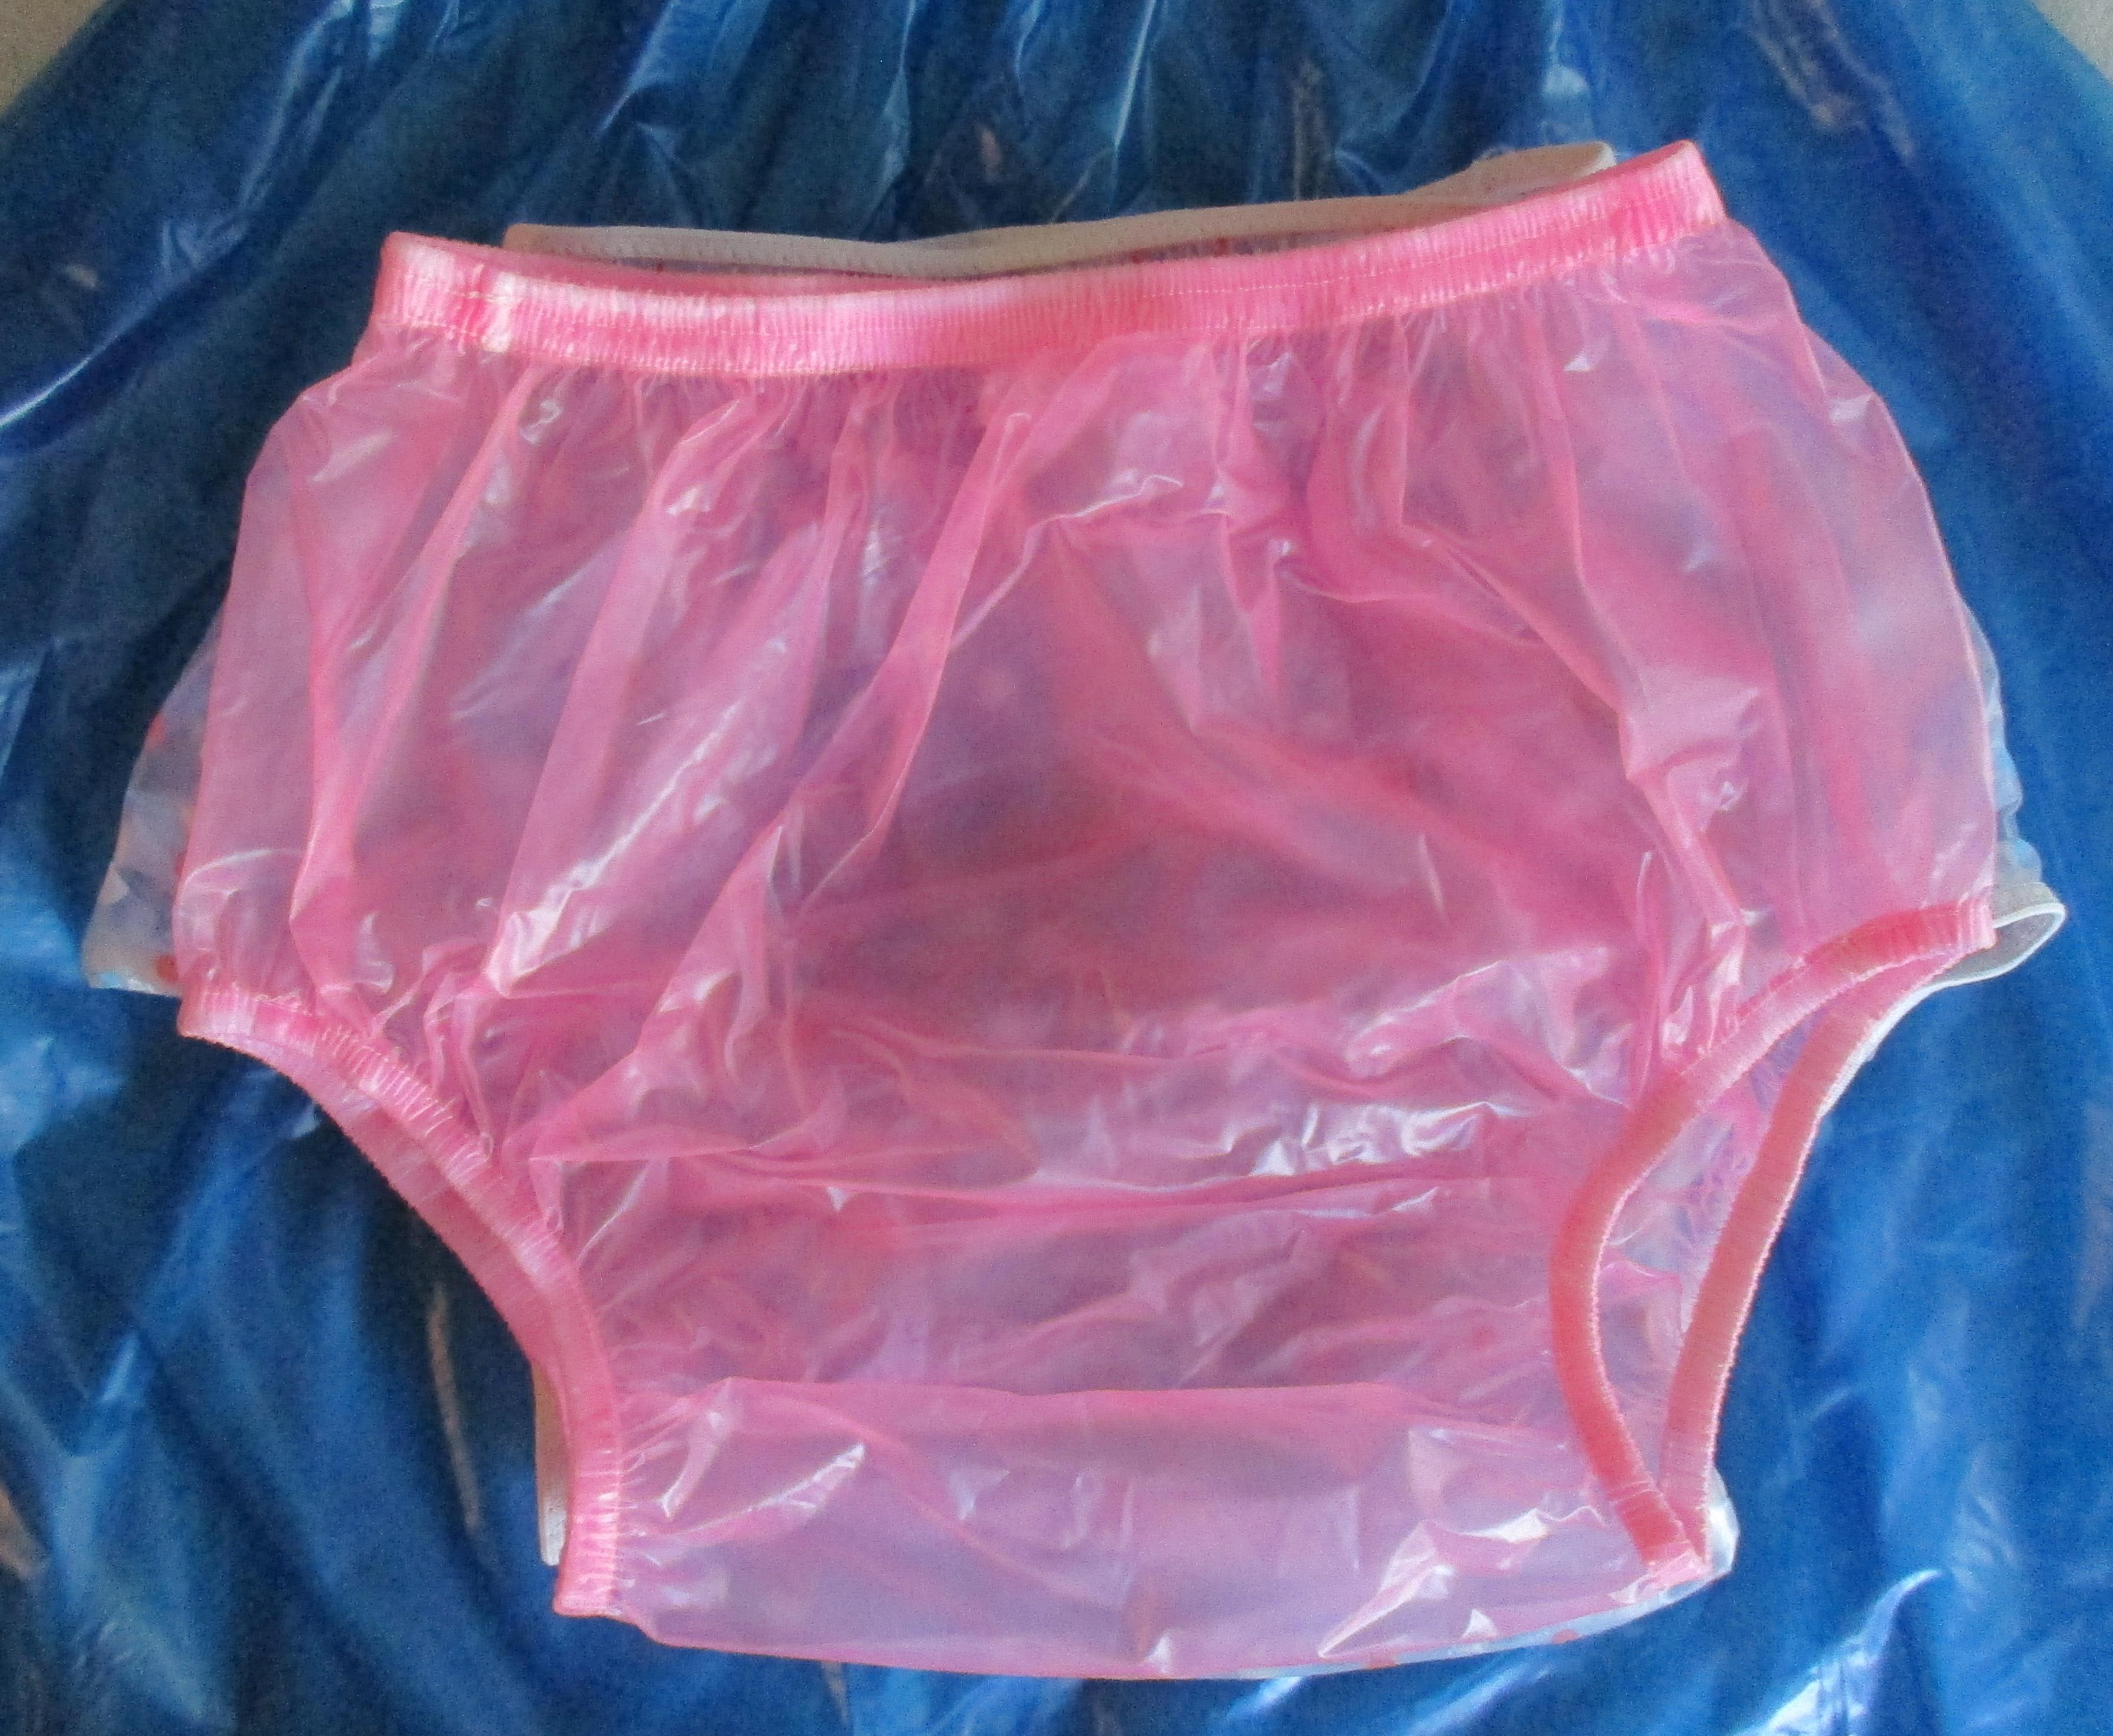 Plastic panty sizing - Cloth Diapers & Panties - [DD] Boards & Chat